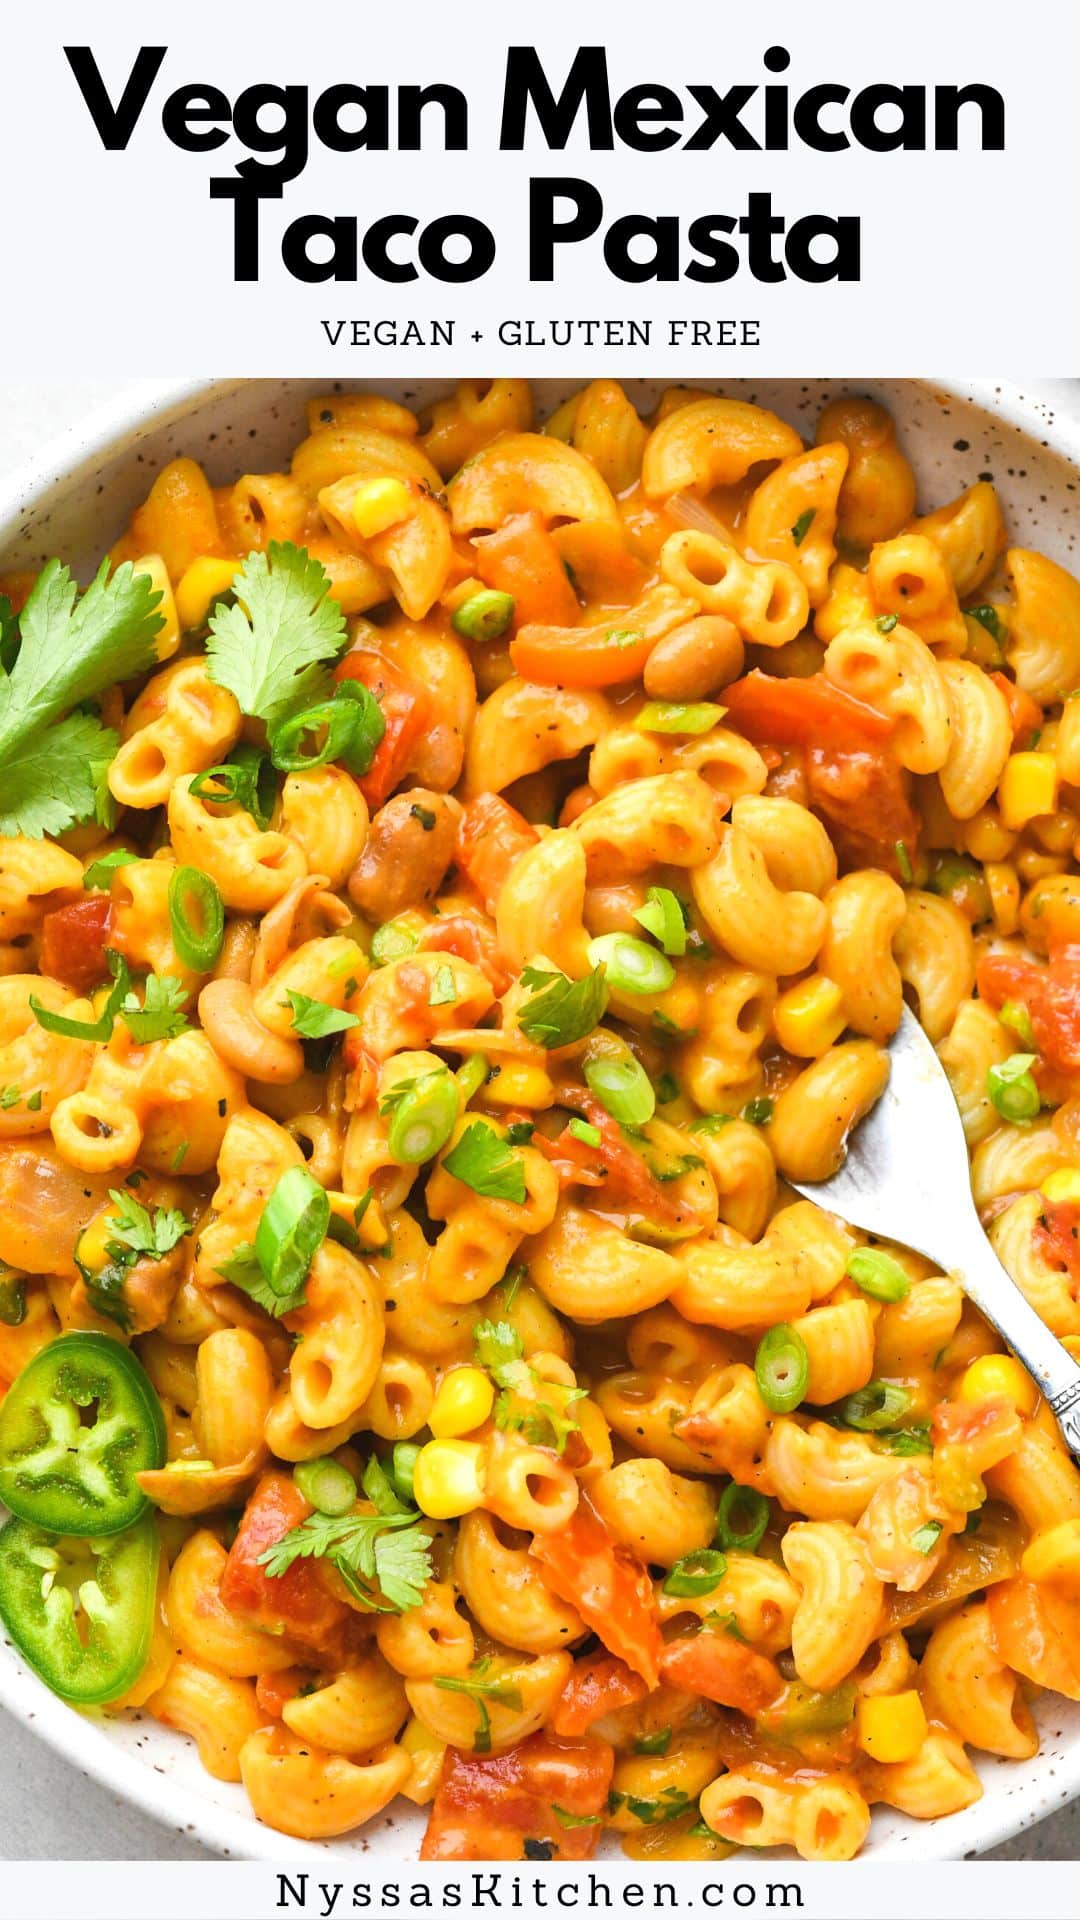 This vegan Mexican taco pasta is a delicious dairy free & gluten free comfort food meal with some serious southwest mac and cheese vibes. Made on the stove top with a nut free cheese sauce, sweet corn, pinto beans, bell pepper, tomatoes, and some sneaky veggies. A healthy meat free recipe that is FULL of flavor and good-for-you ingredients! Vegan, vegetarian, gluten free, nut free.